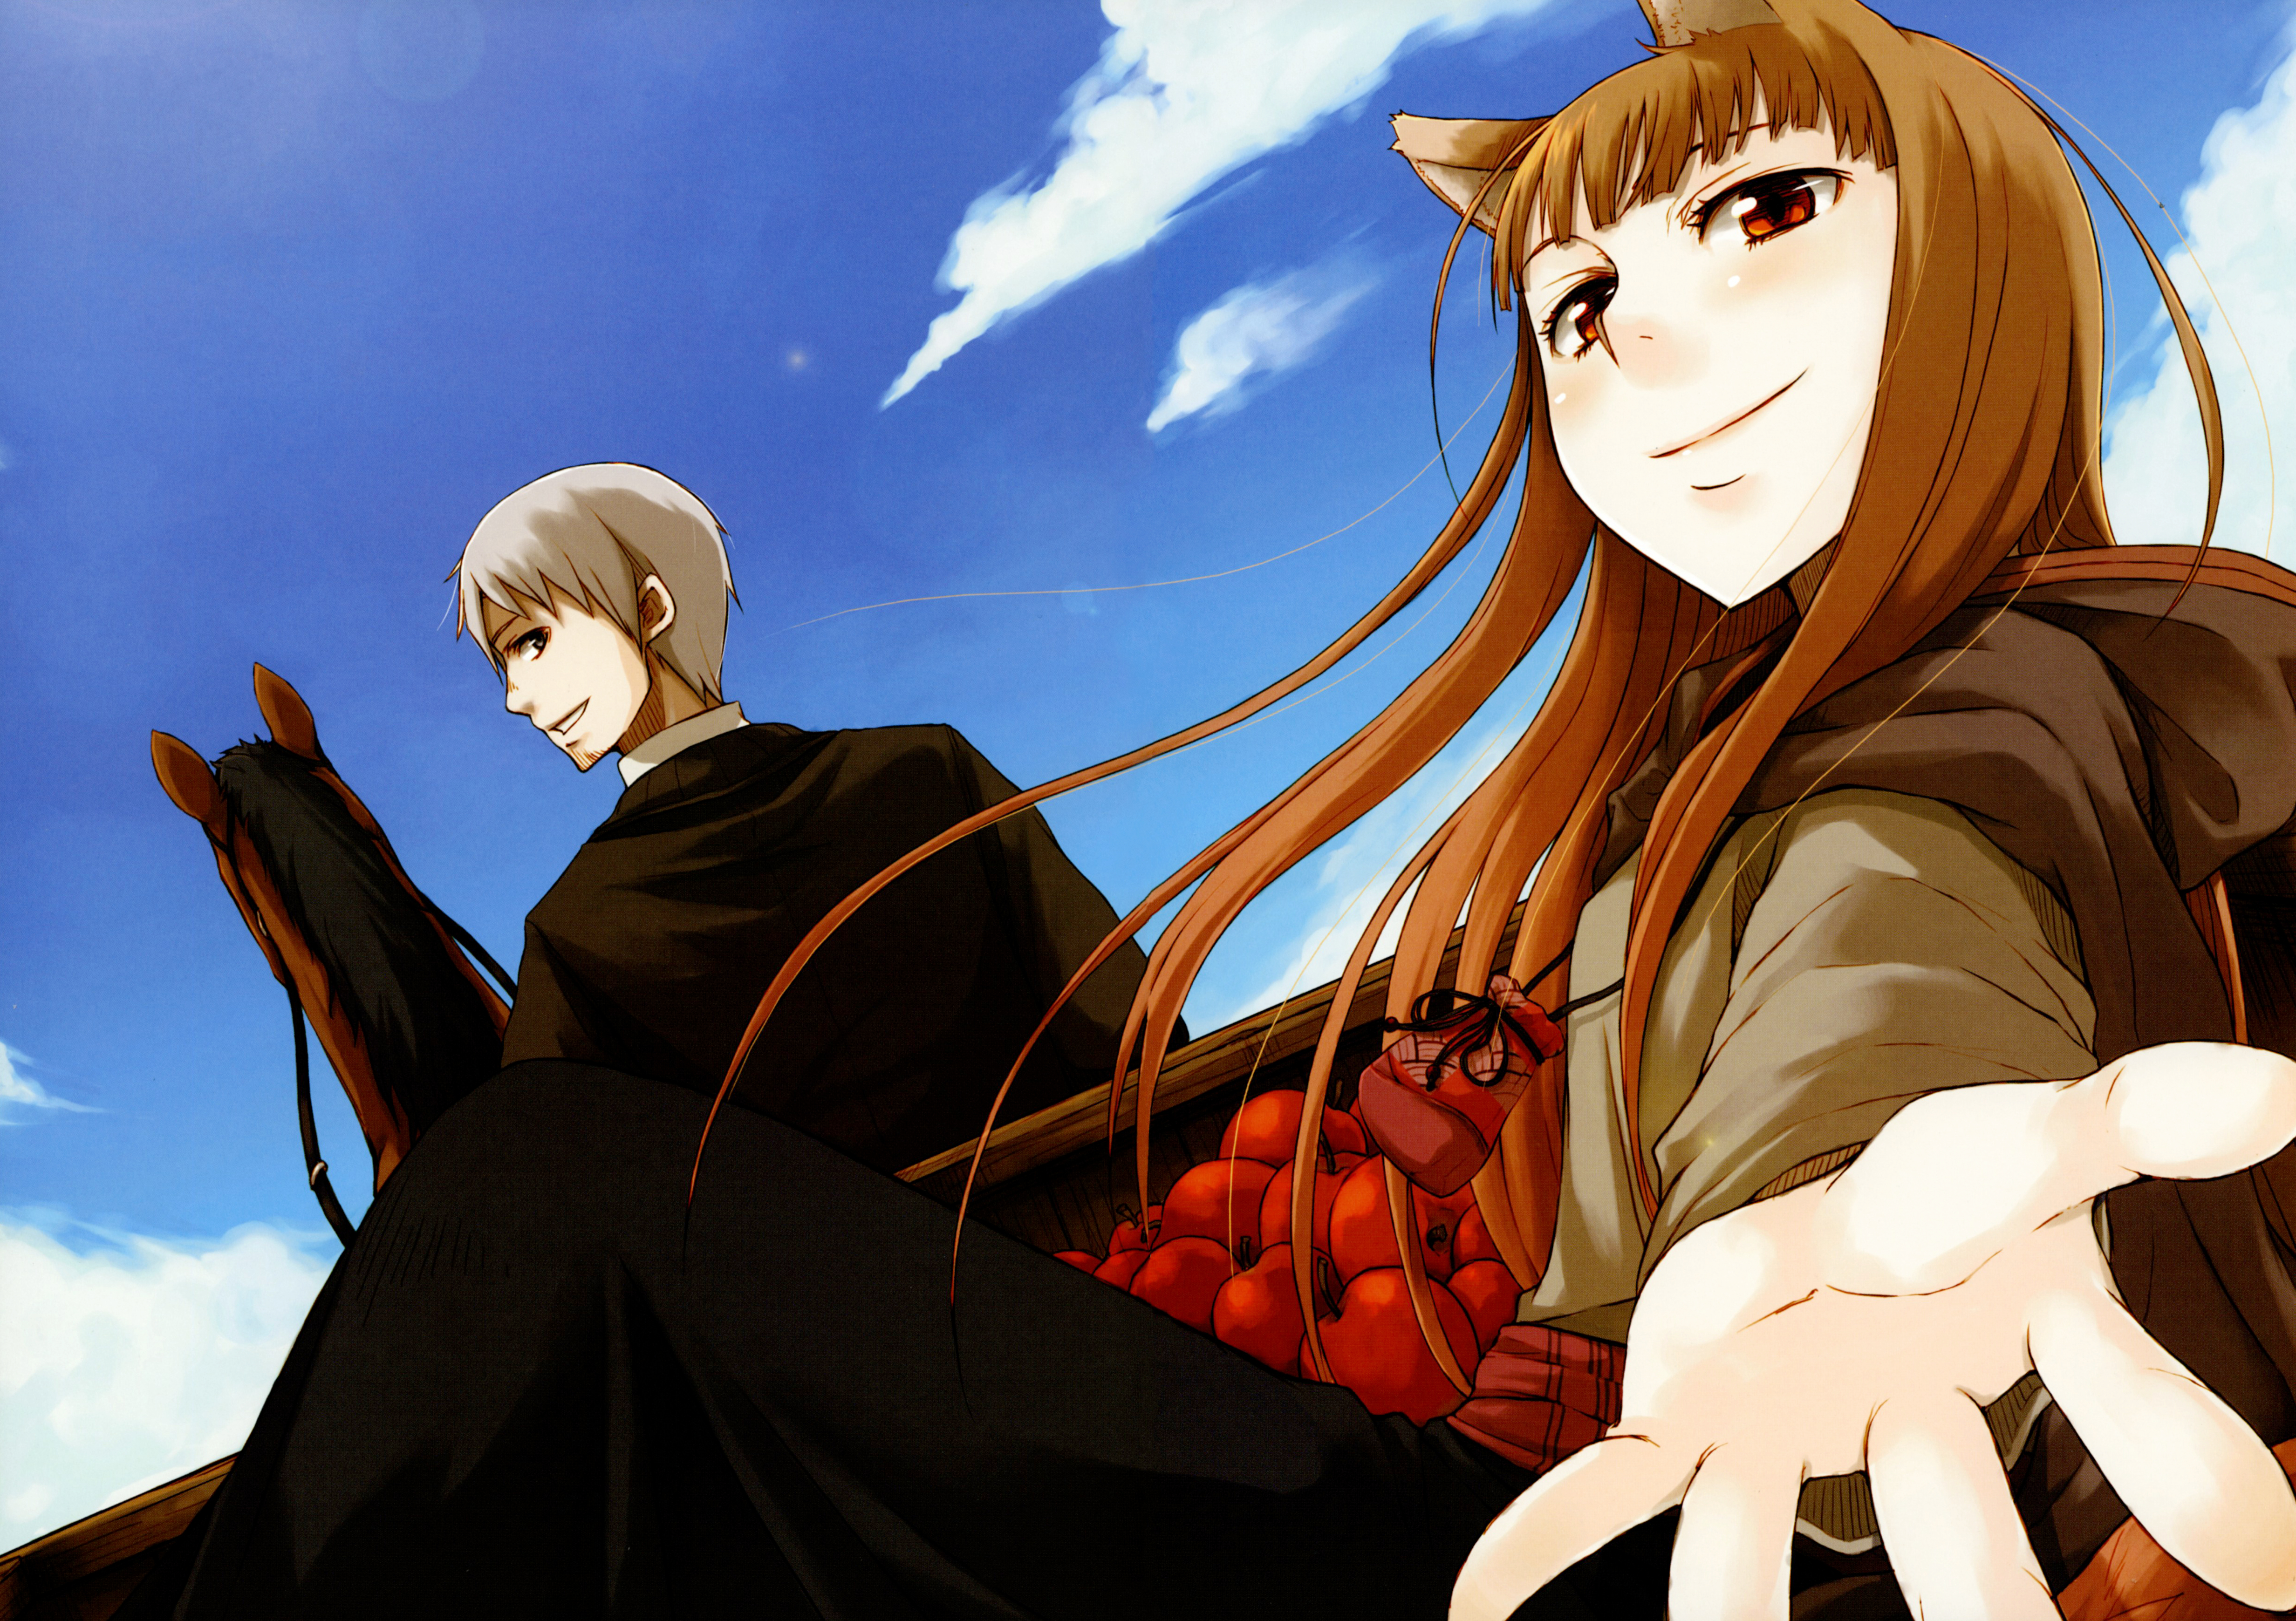 Spice & Wolf 4k wallpaper featuring Holo and Kraft Lawrence.